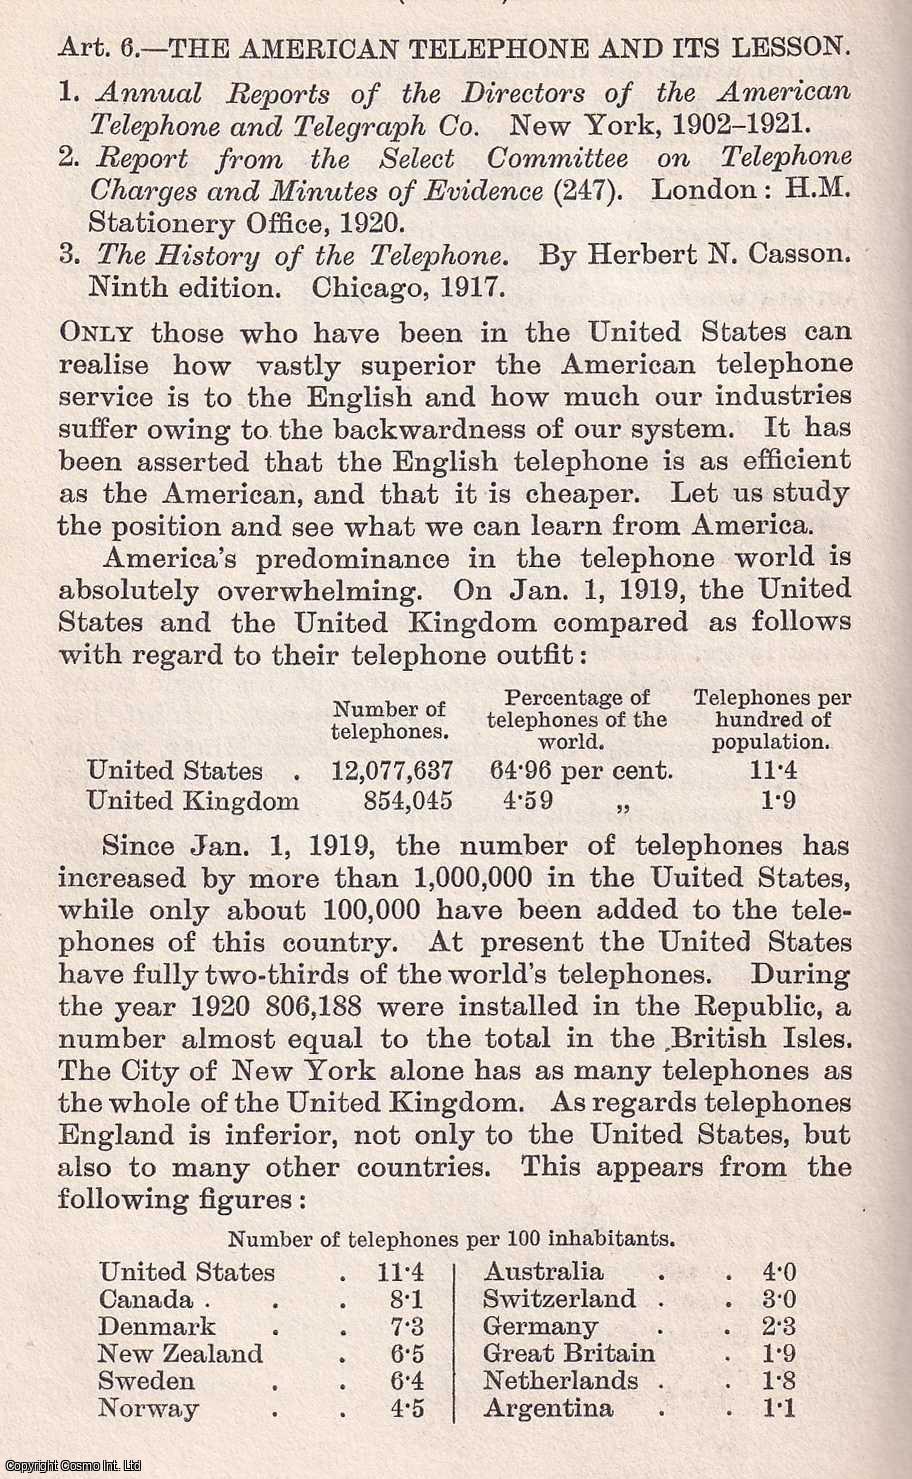 J. Ellis Barker - American Telephone And Its Lesson. An uncommon original article from The Quarterly Review, 1921.